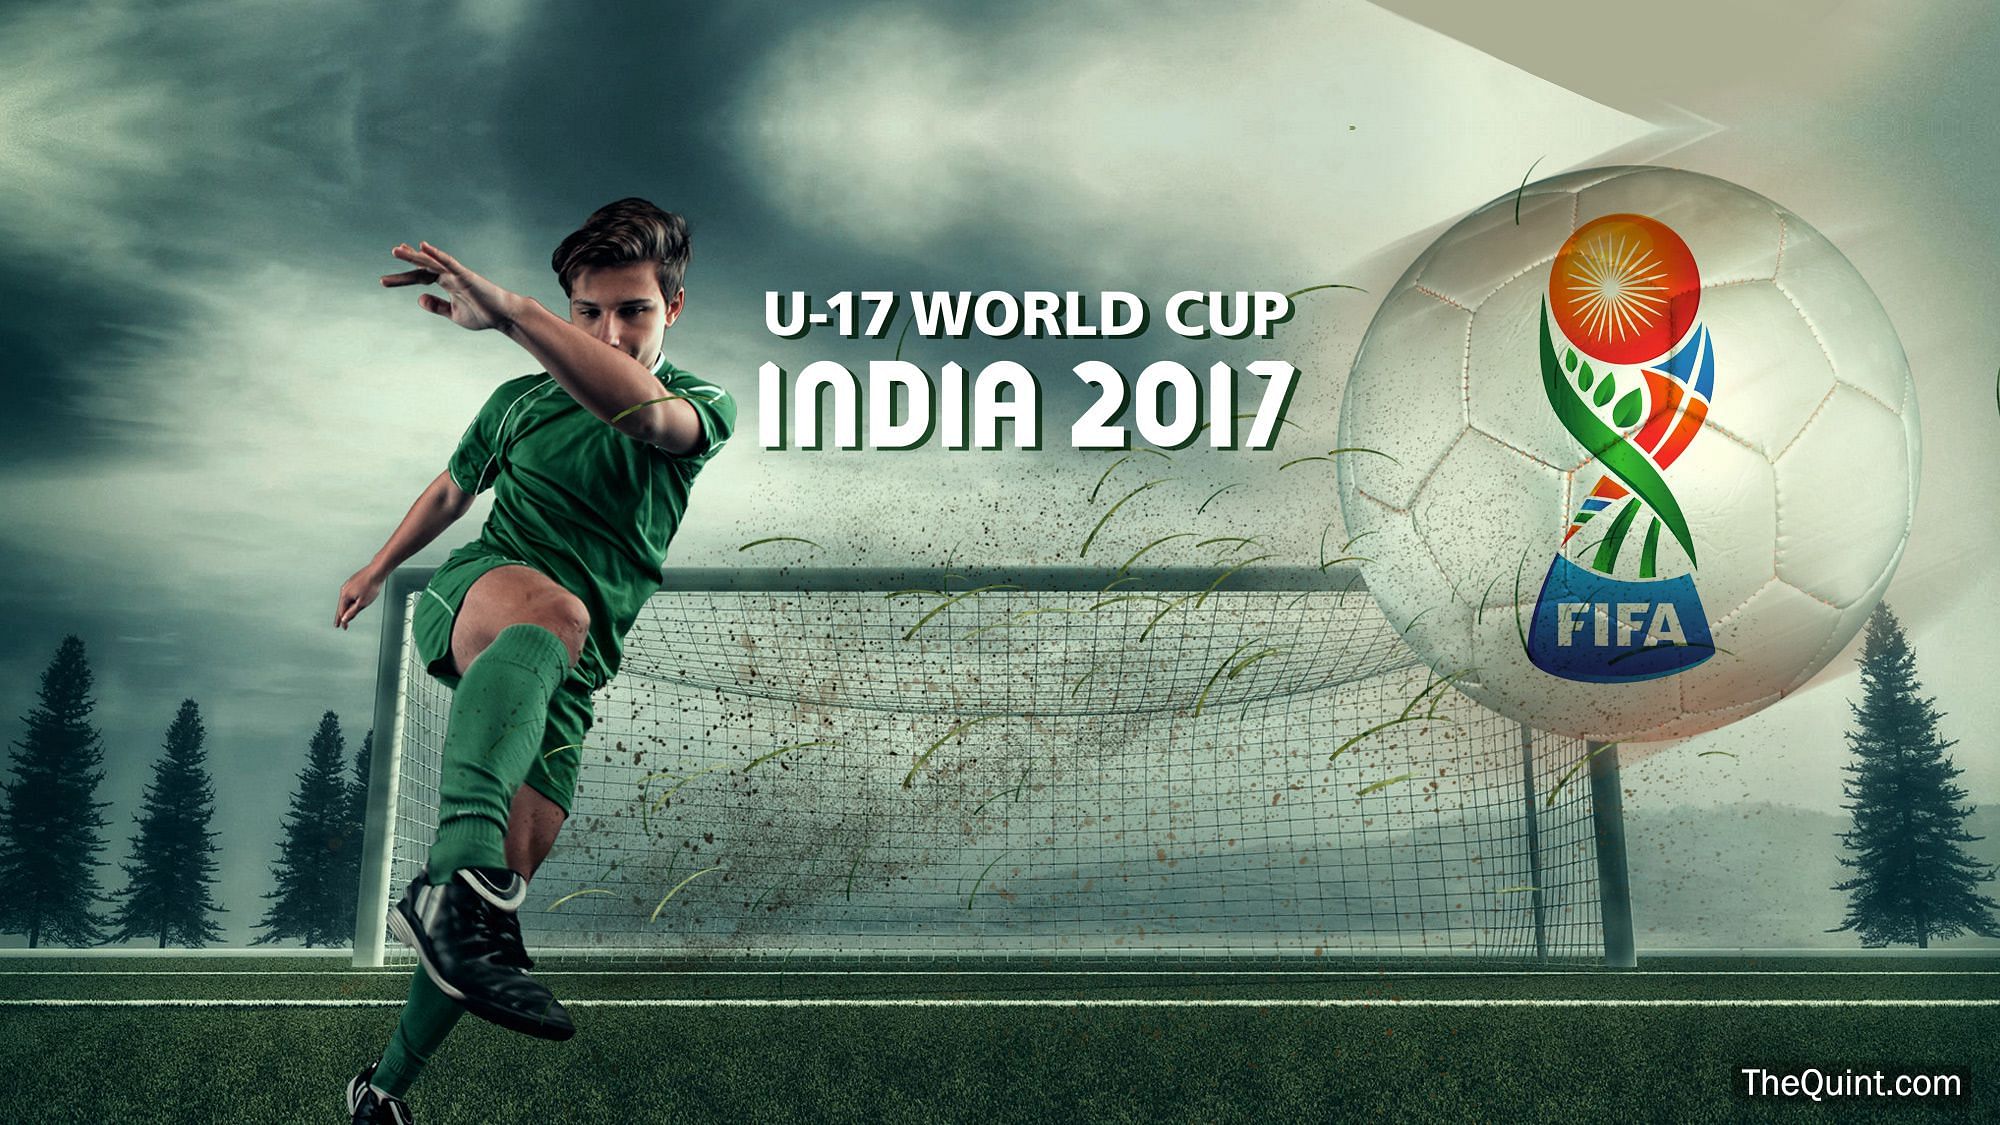 FIFA has praised India for the way it hosted the U-17 World Cup. <i>(Photo: <b>The Quint</b>)</i>